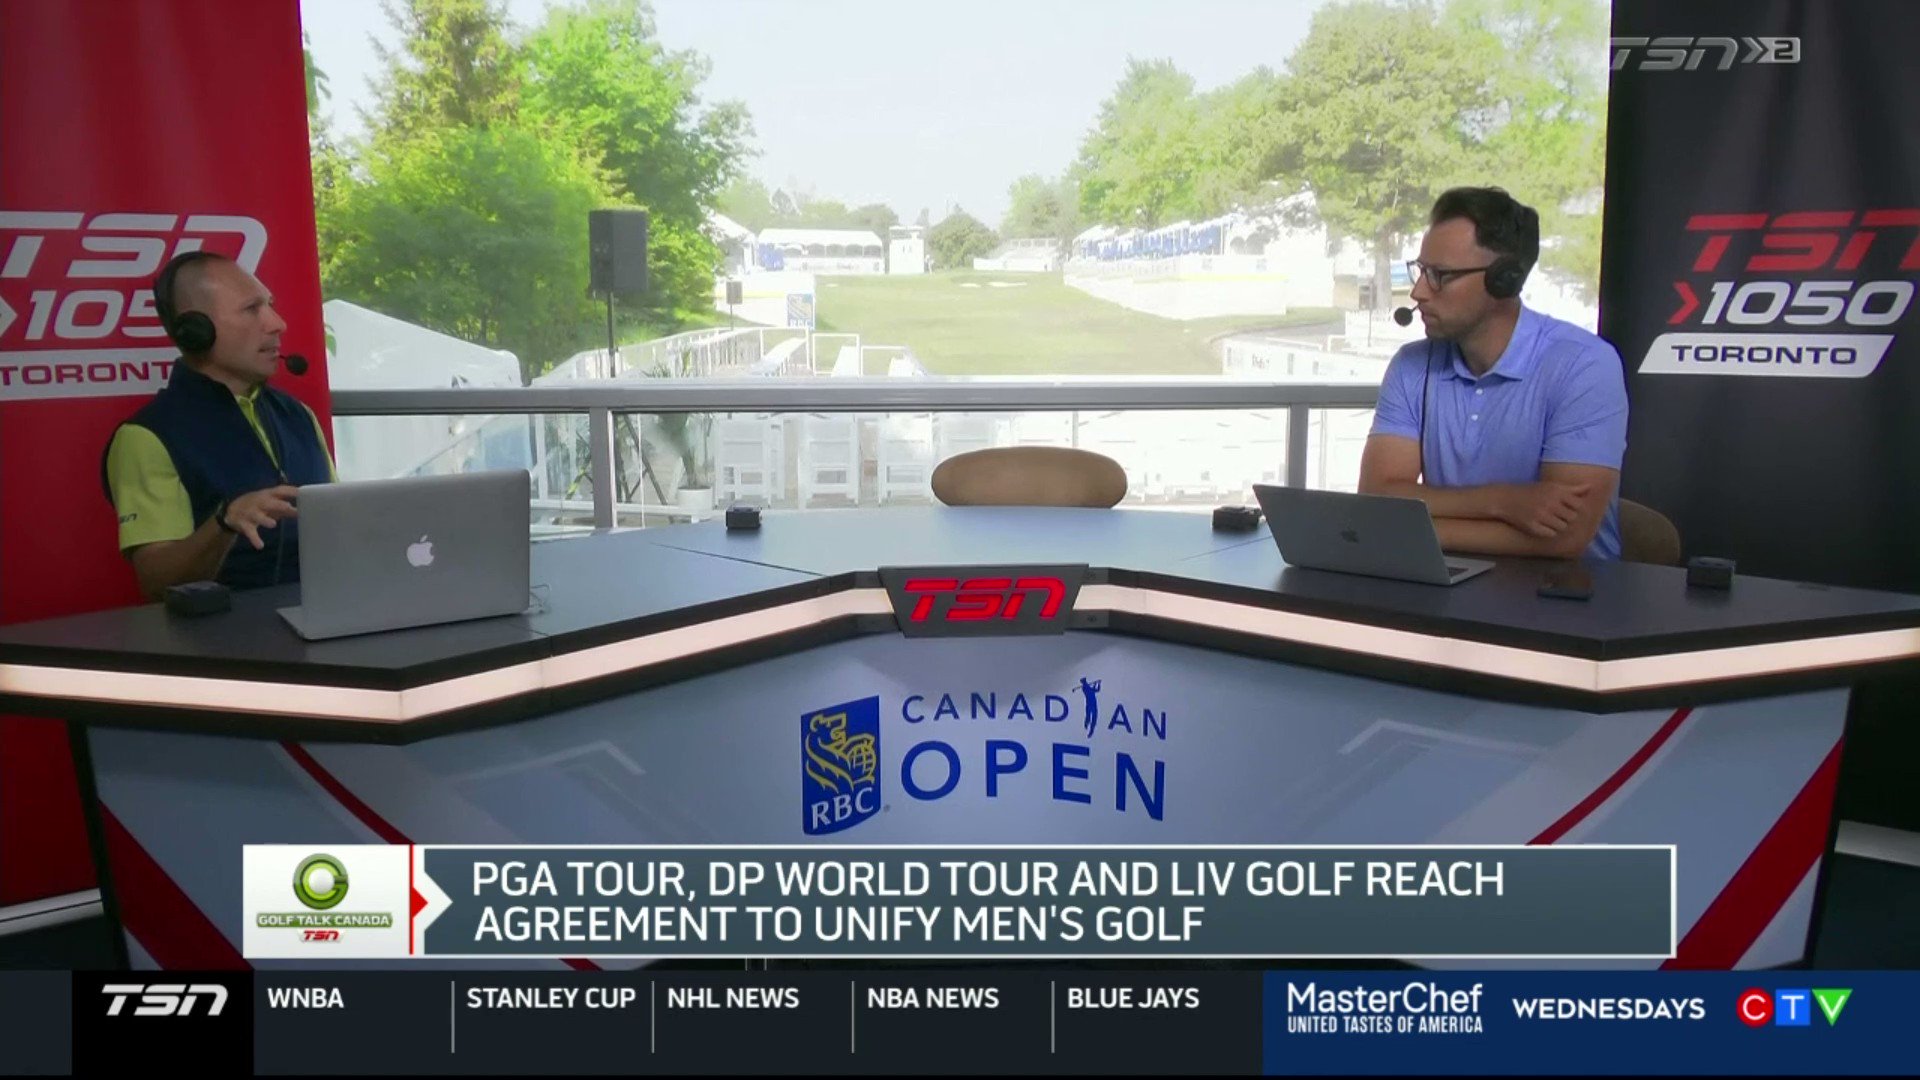 TSN on X: "GTC Live from Oakdale: Golf Talk Canada reacts to news that the  PGA TOUR and LIV Golf will be merging, and what that could look like in  terms of